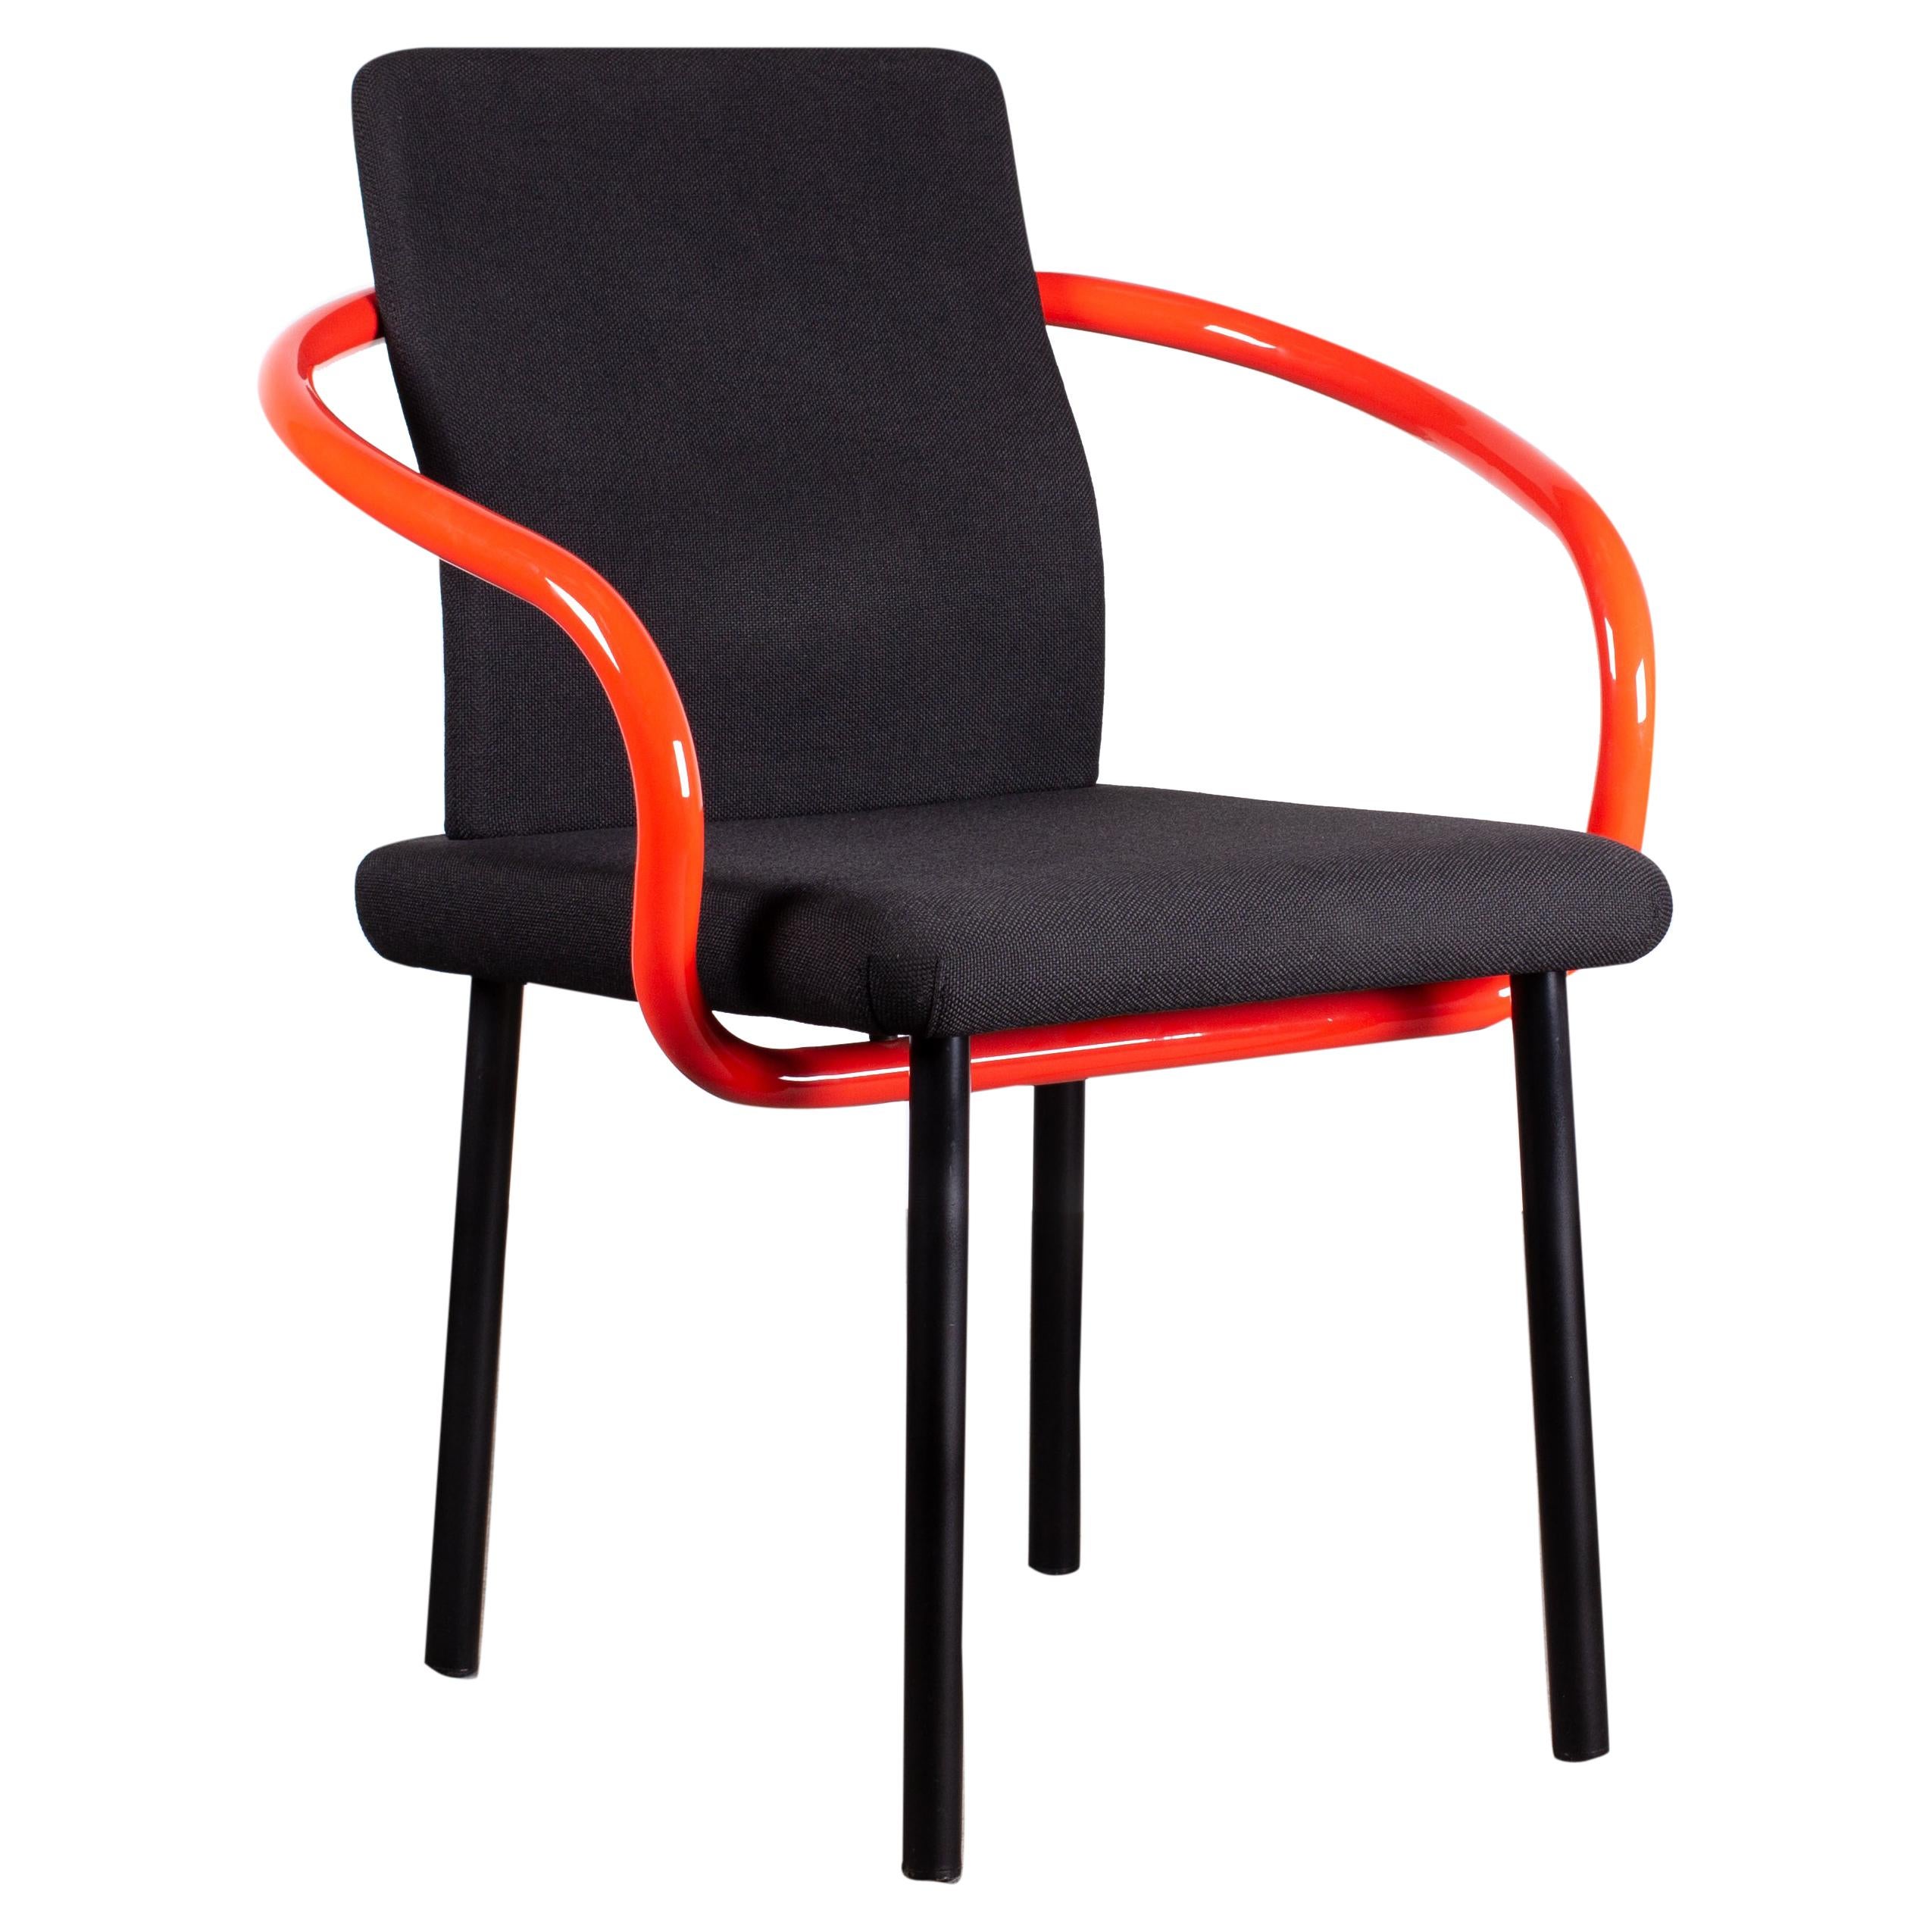 Four Ettore Sottsass Mandarin Chairs for Knoll in Red & Black